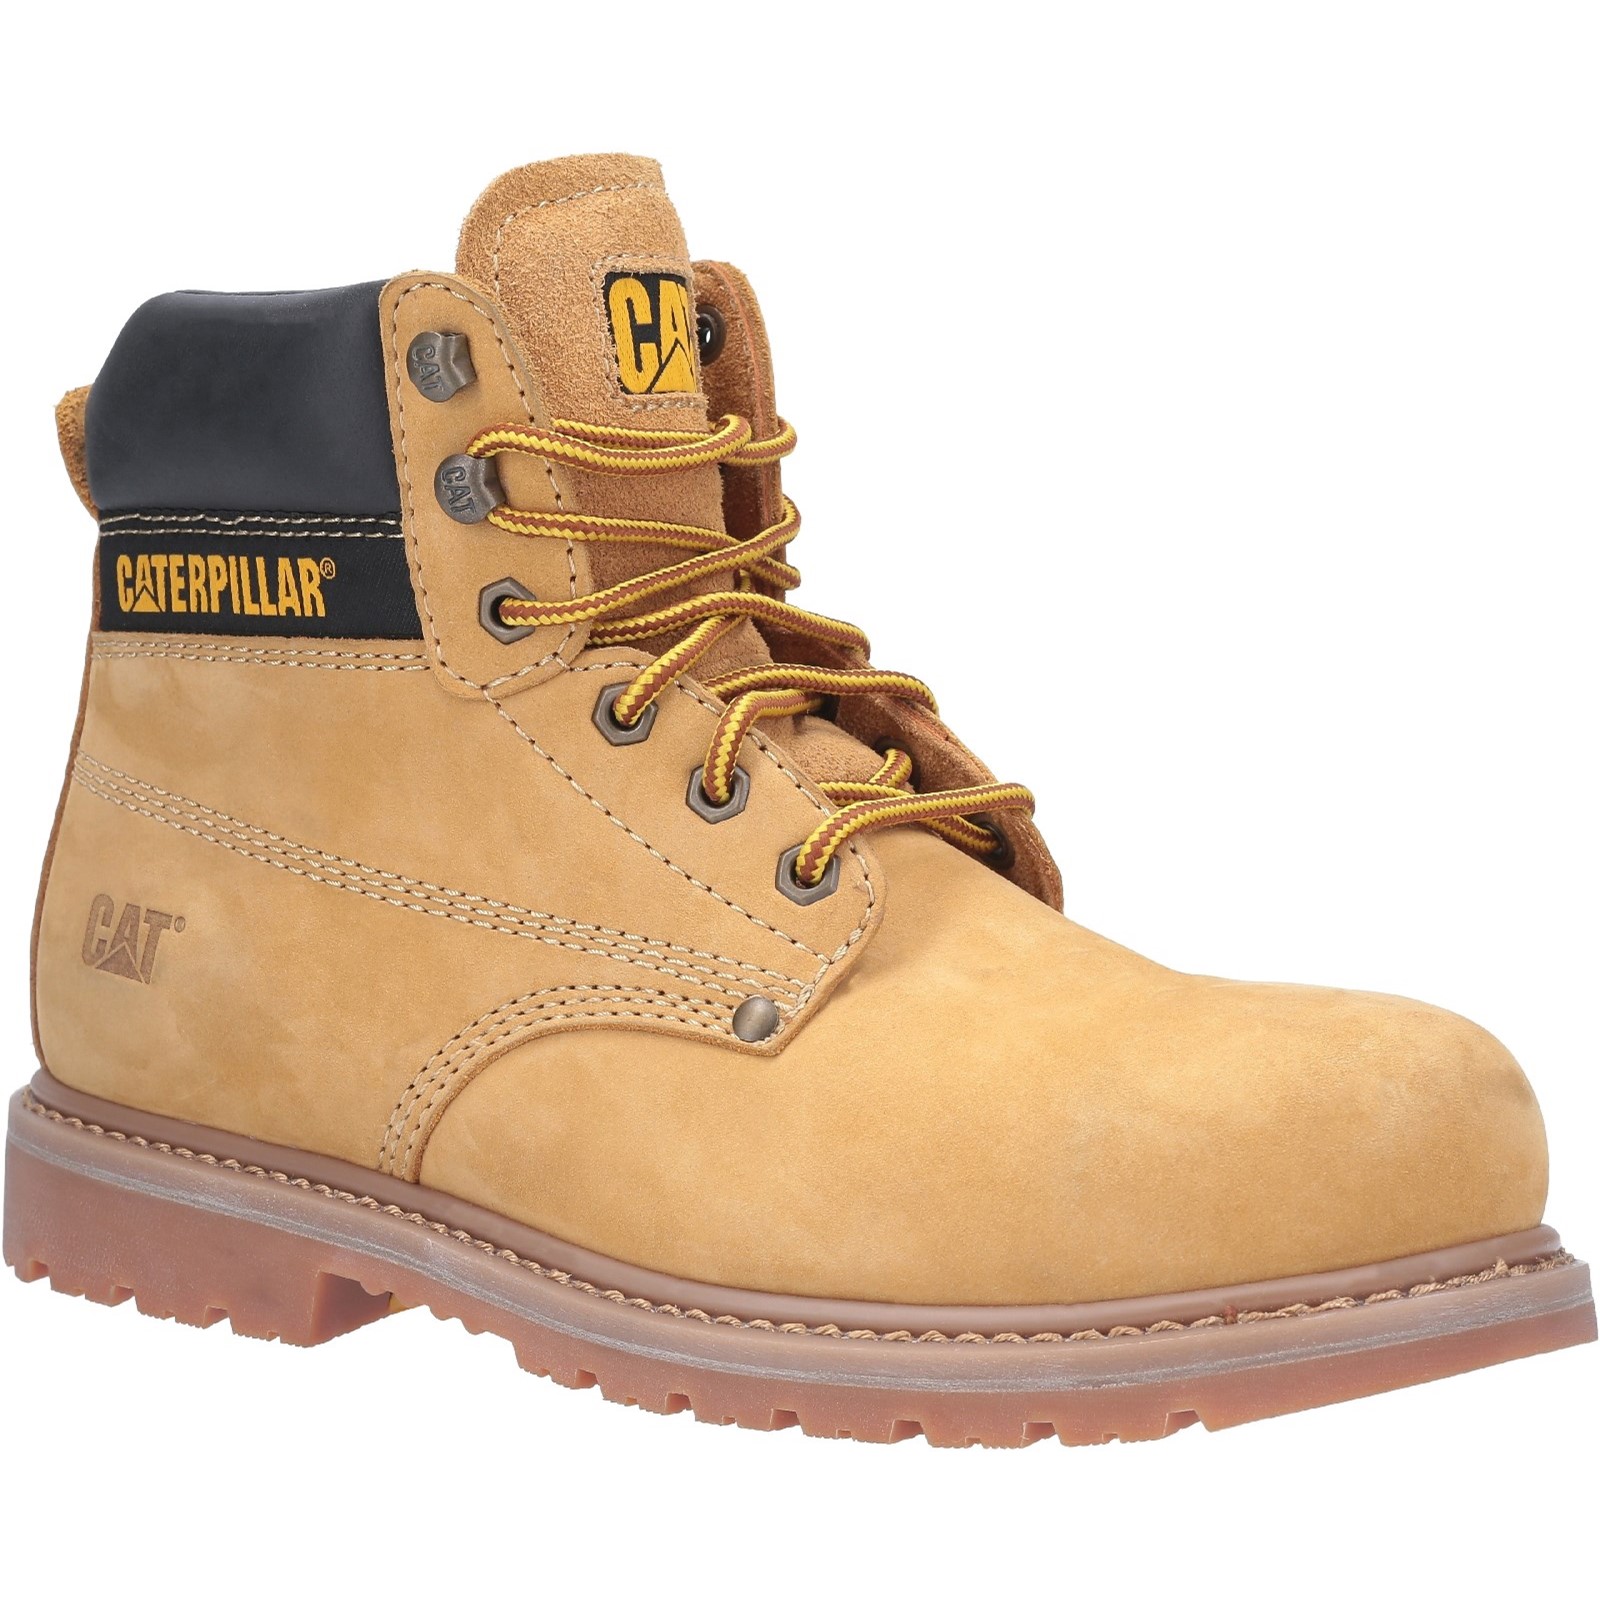 Powerplant GYW Safety Boot